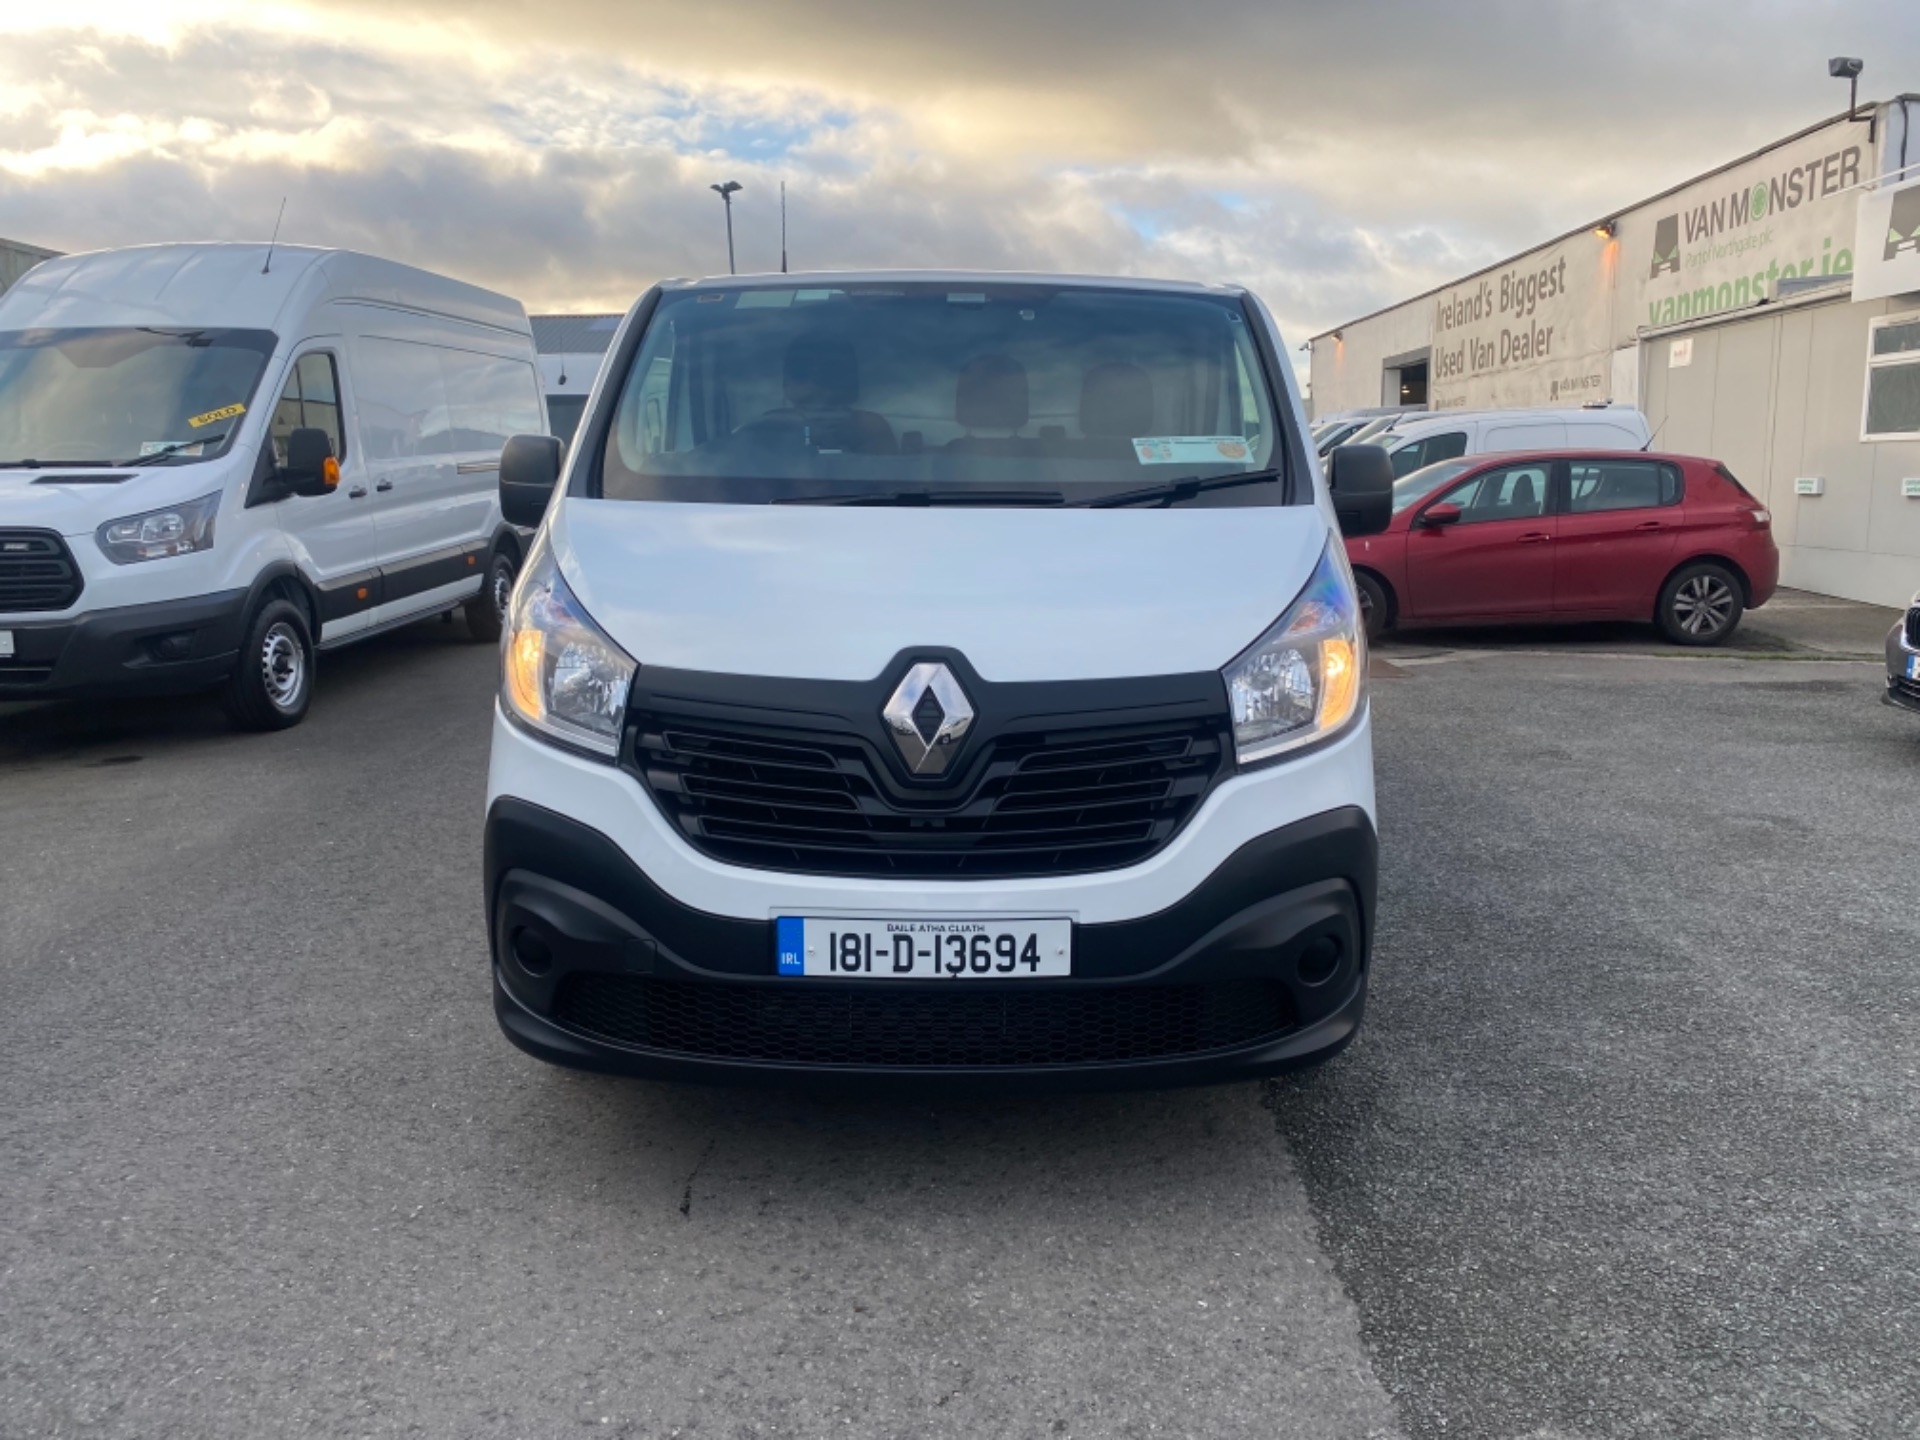 2018 Renault Trafic LL29 DCI 120 Business 3DR (181D13694) Thumbnail 2